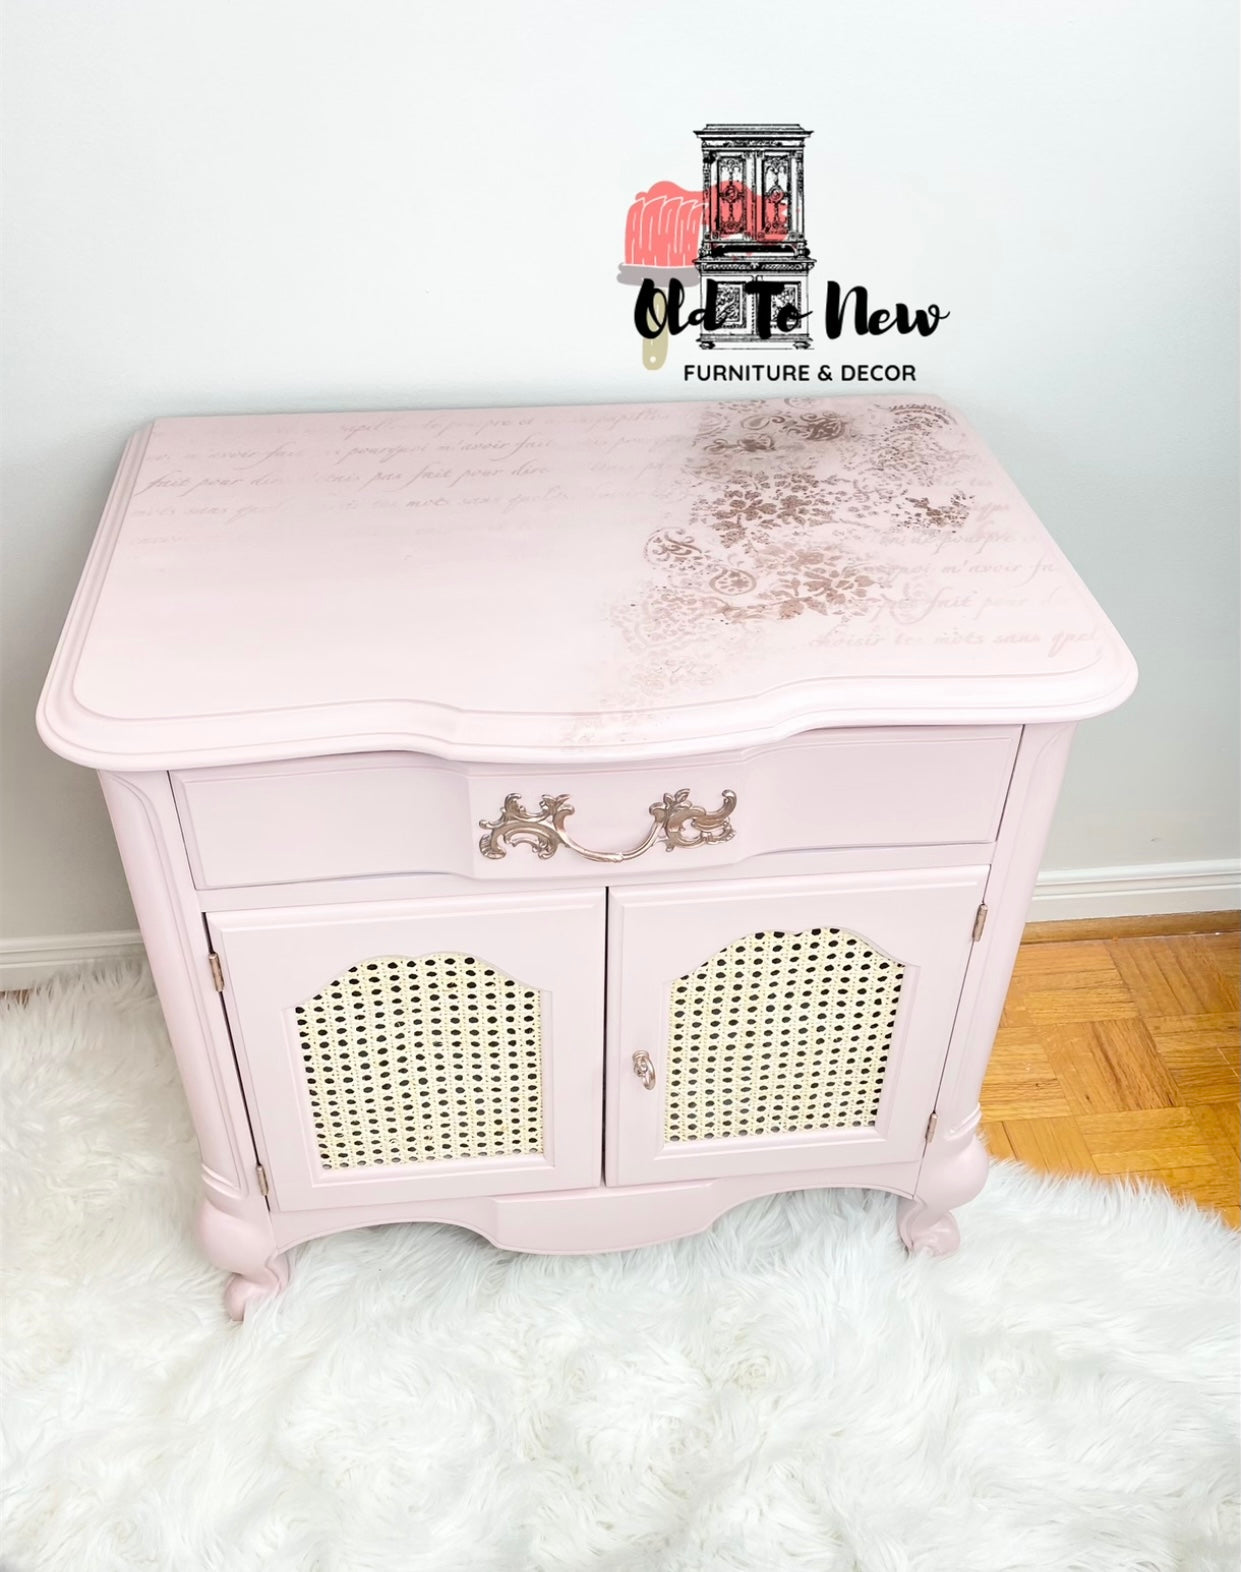 Top View of French Provincial Side Table painted  pink at Old To New Furniture  copper accents and rattan cane DIY material  door insert